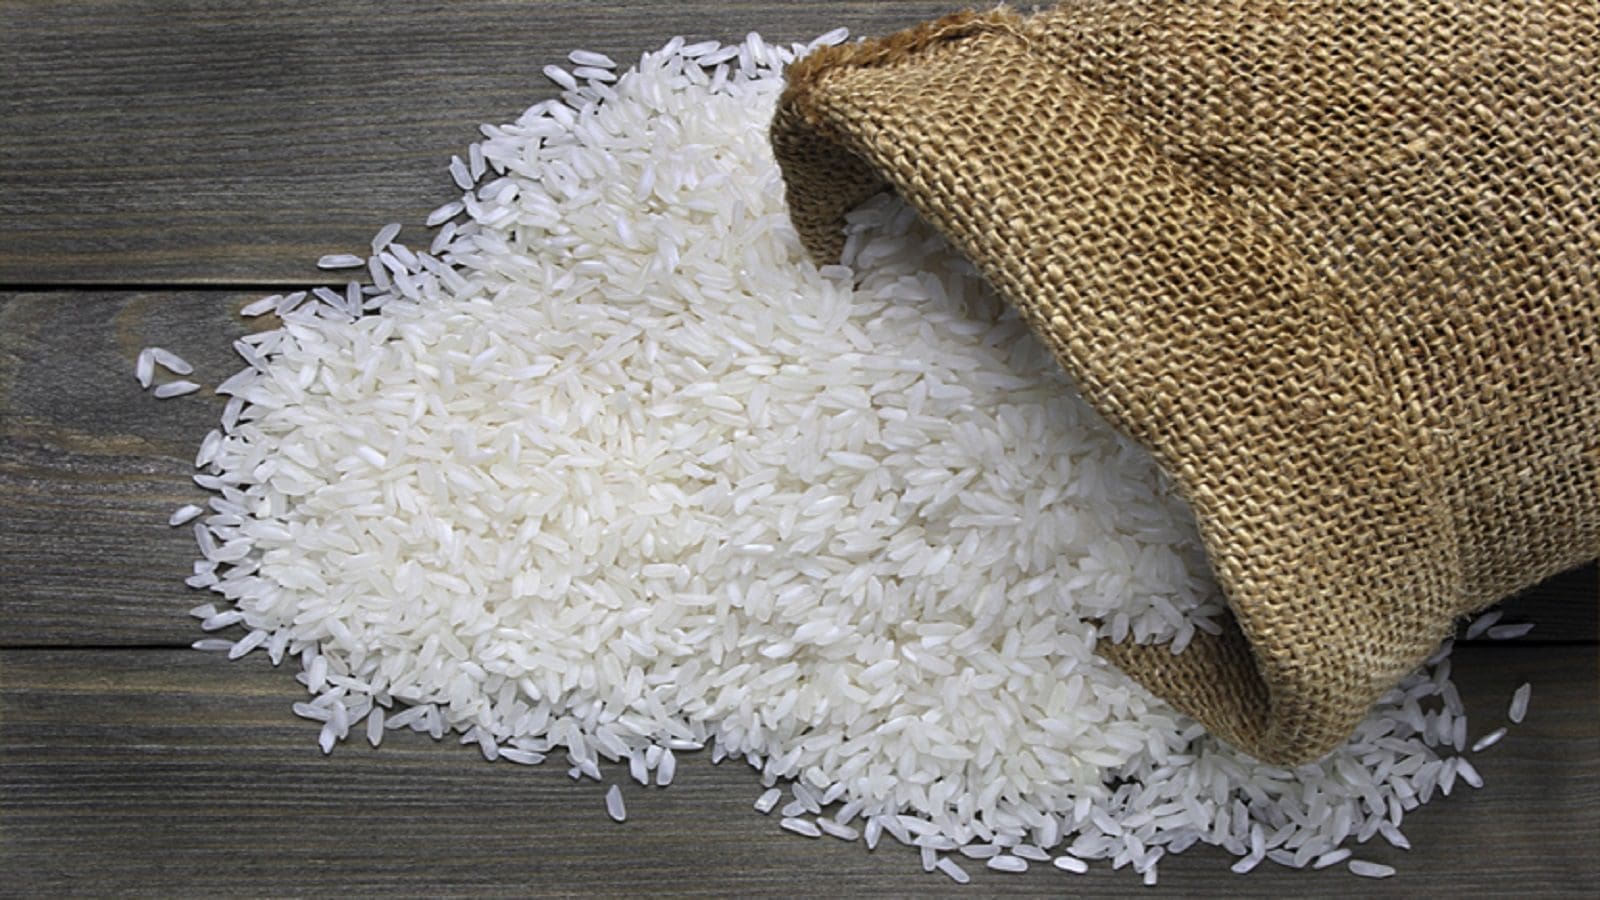 Burkina Faso launches National Rice Observatory Body to oversee the rice sector